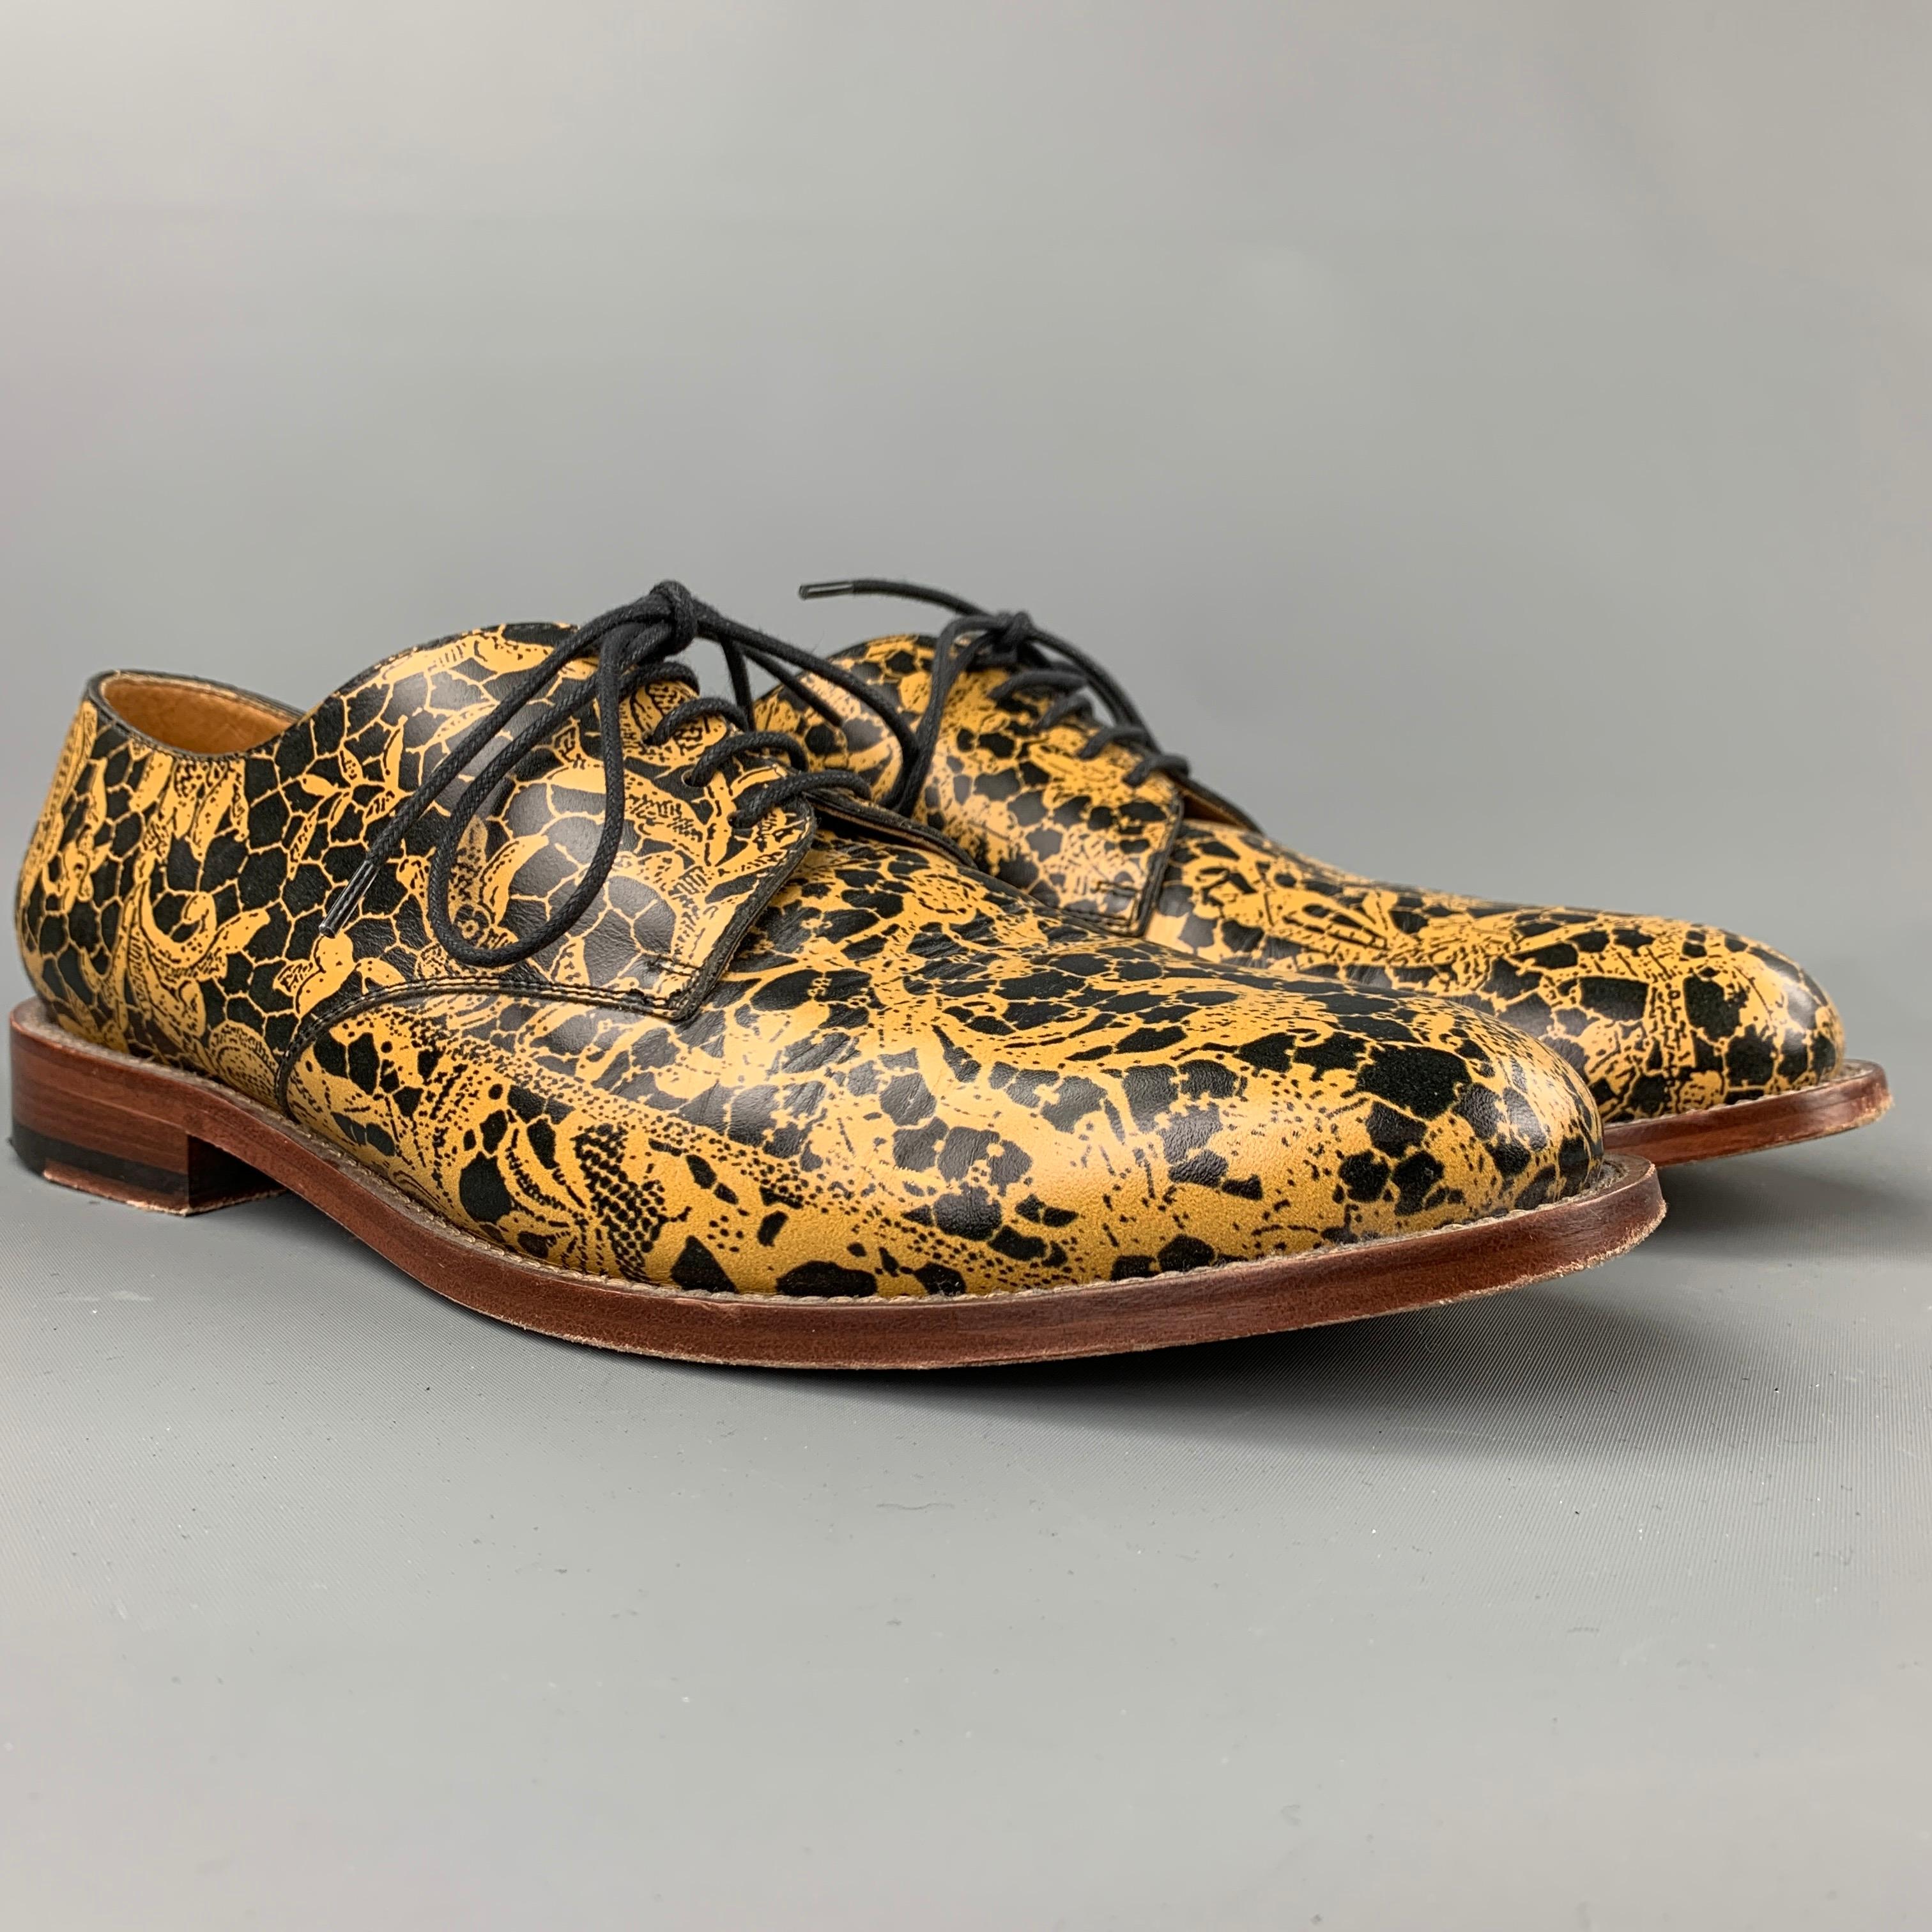 VIVIENNE WESTWOOD shoes comes in a black & yellow abstract leather featuring a cap toe, wooden sole, and a lace up closure. Made in Italy.

Very Good Pre-Owned Condition.
Marked: 45

Outsole: 12.5 in. x 4.5 in. 